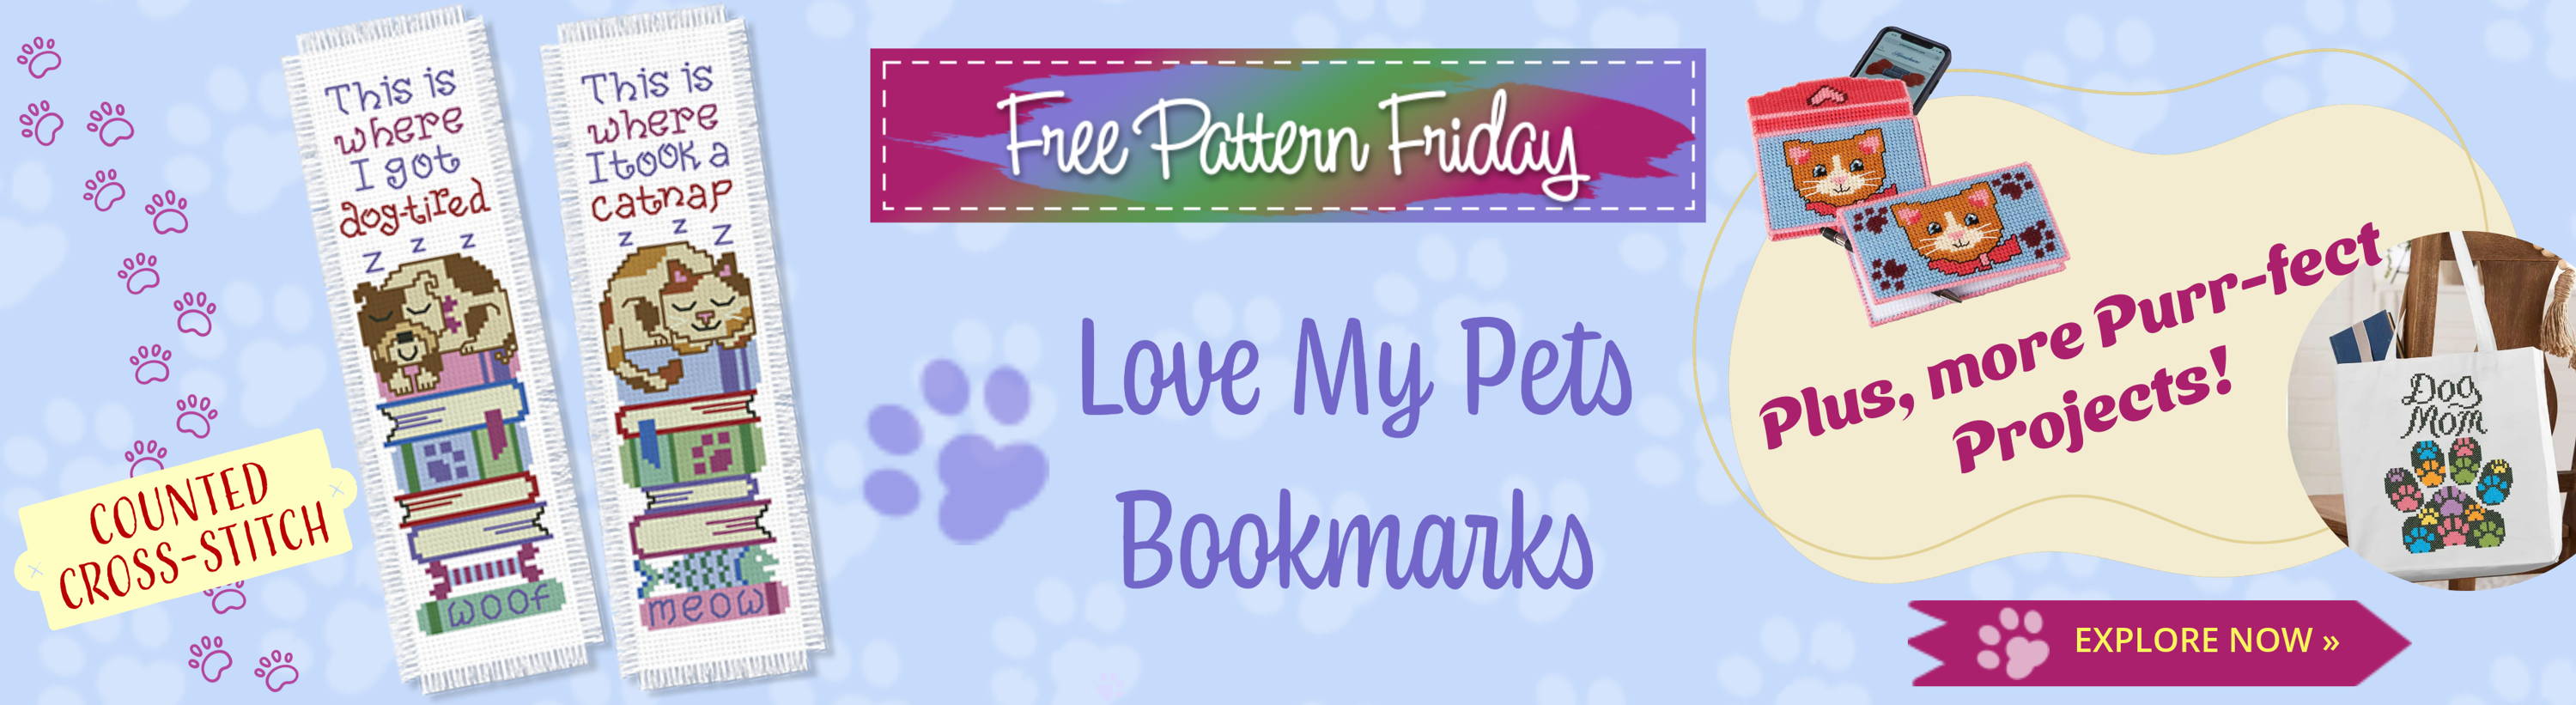 Free Pattern Friday! Love My Pets Bookmarks (Counted Cross-Stitch). Plus, more Purr-fect Projects to Explore! Images: pet-themed needleworkwork.